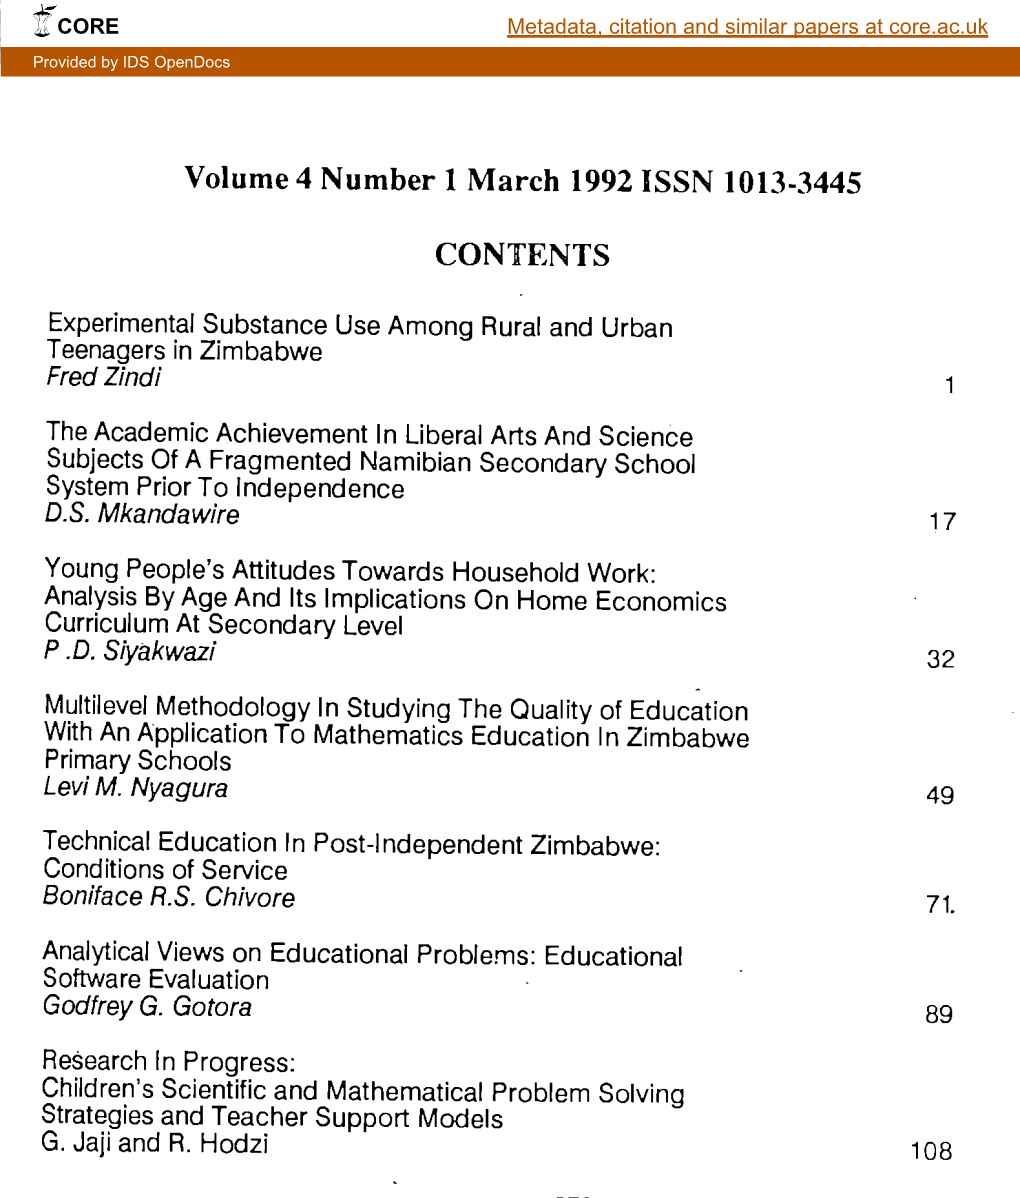 Volume 4 Number 1 March 1992 ISSN 1013-3445